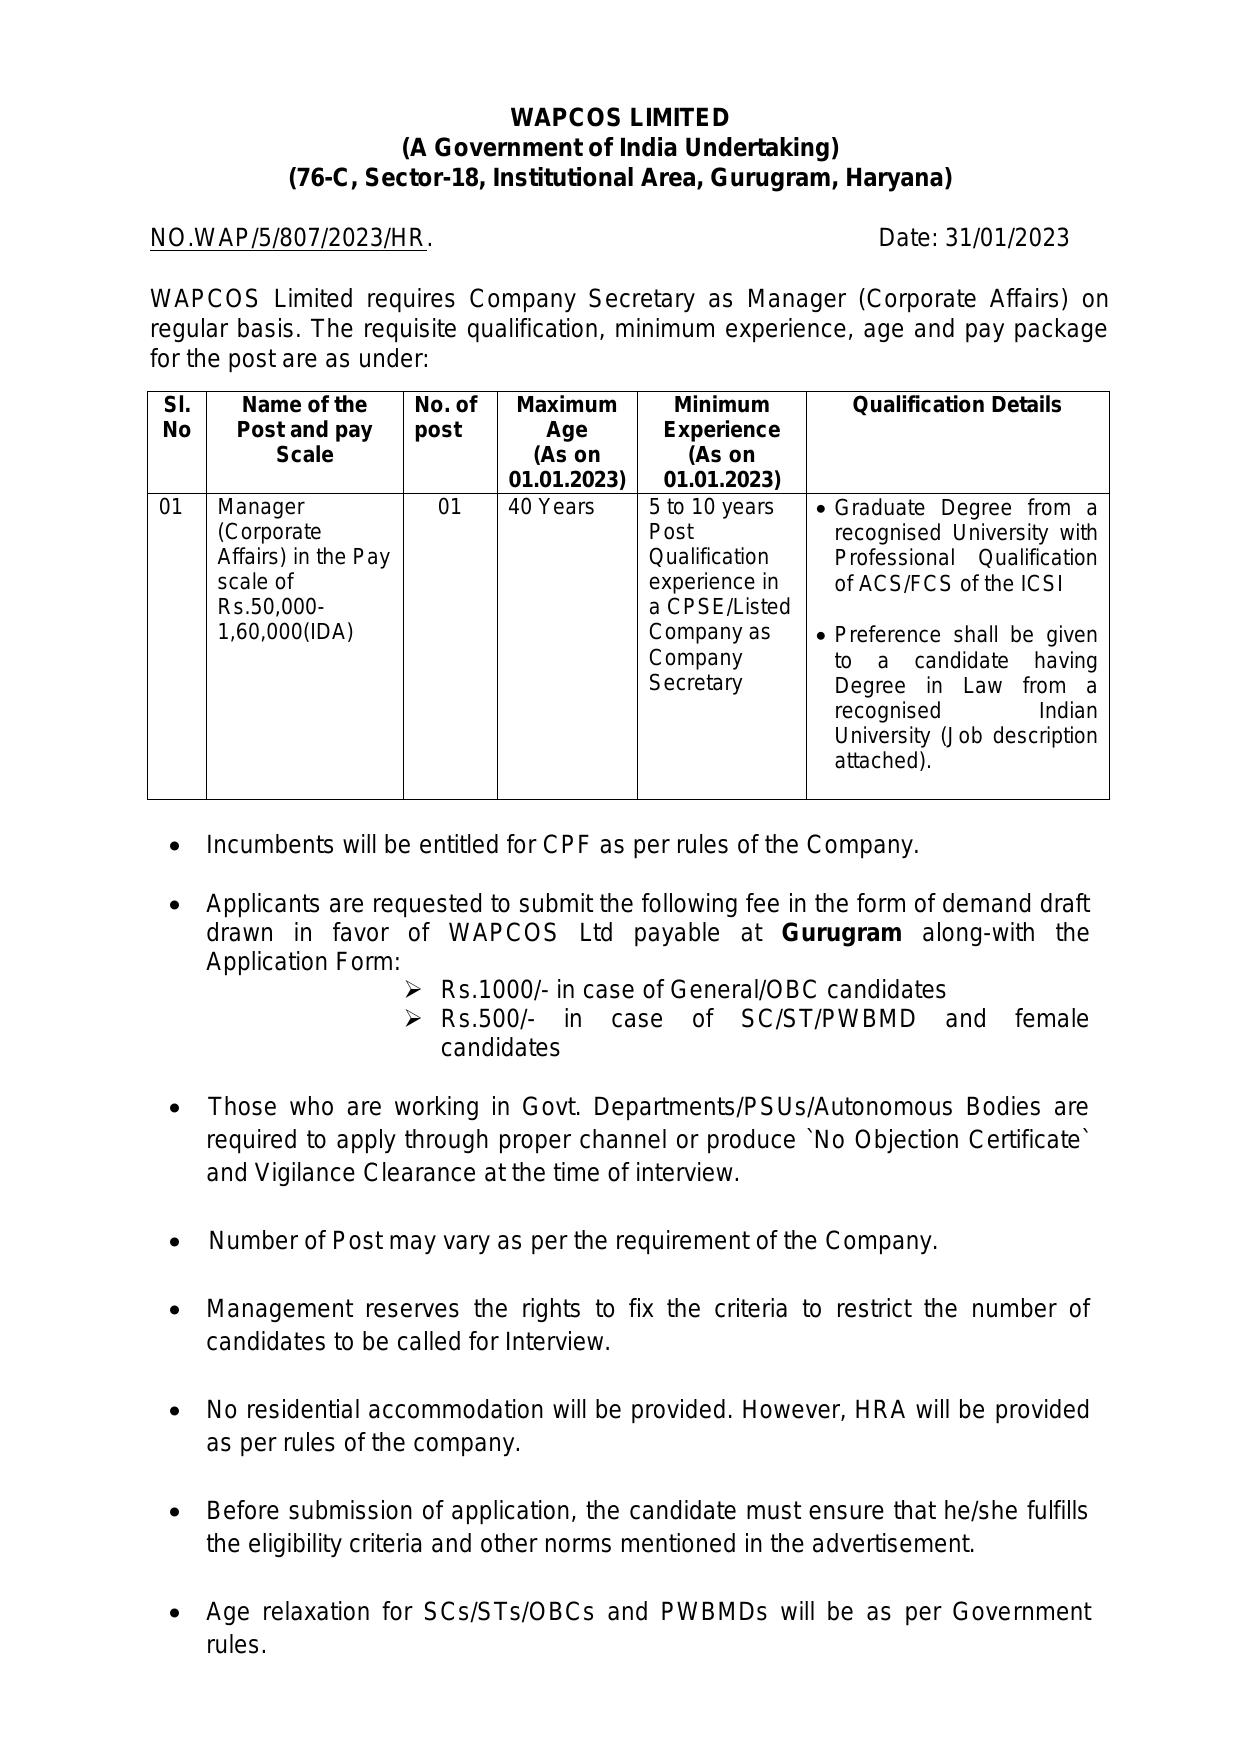 WAPCOS Limited Invites Application for Manager Recruitment 2023 - Page 2